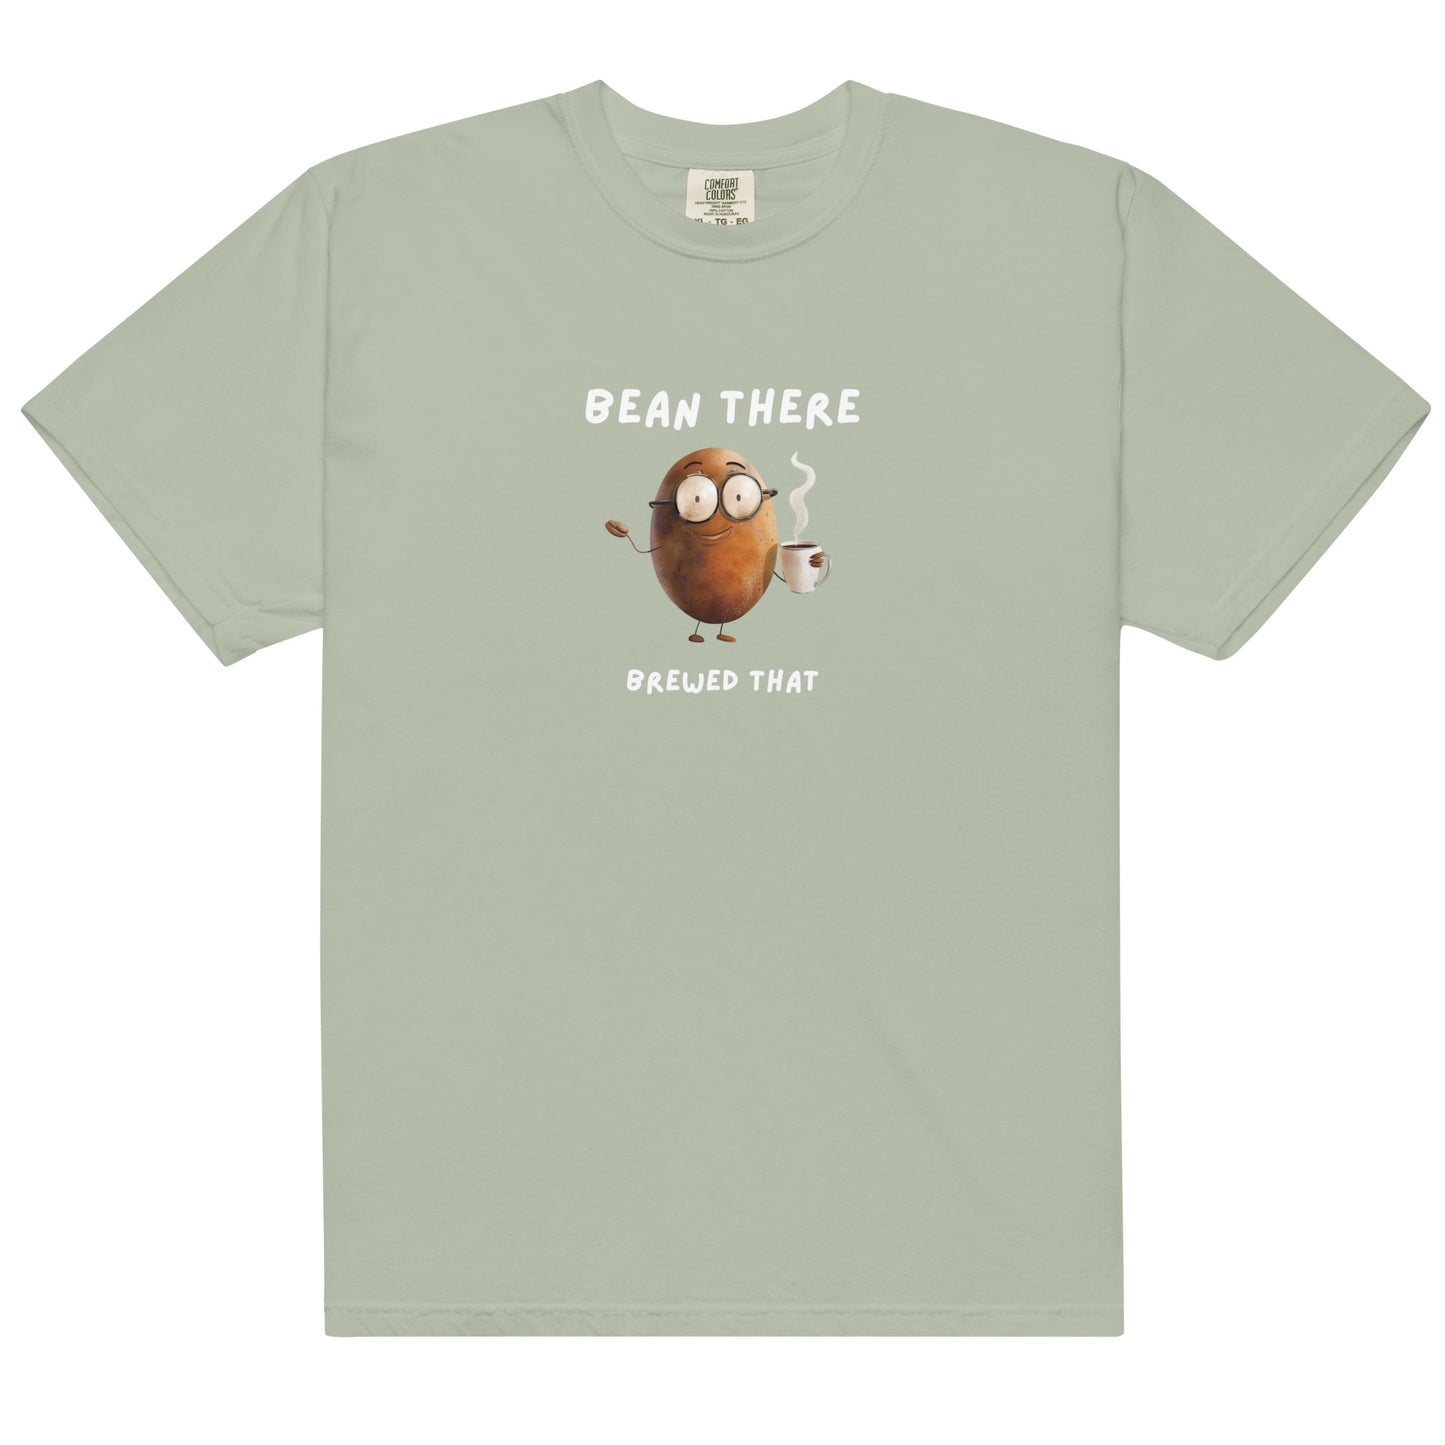 Coffee Bean There - Done That T-shirt - Unisex